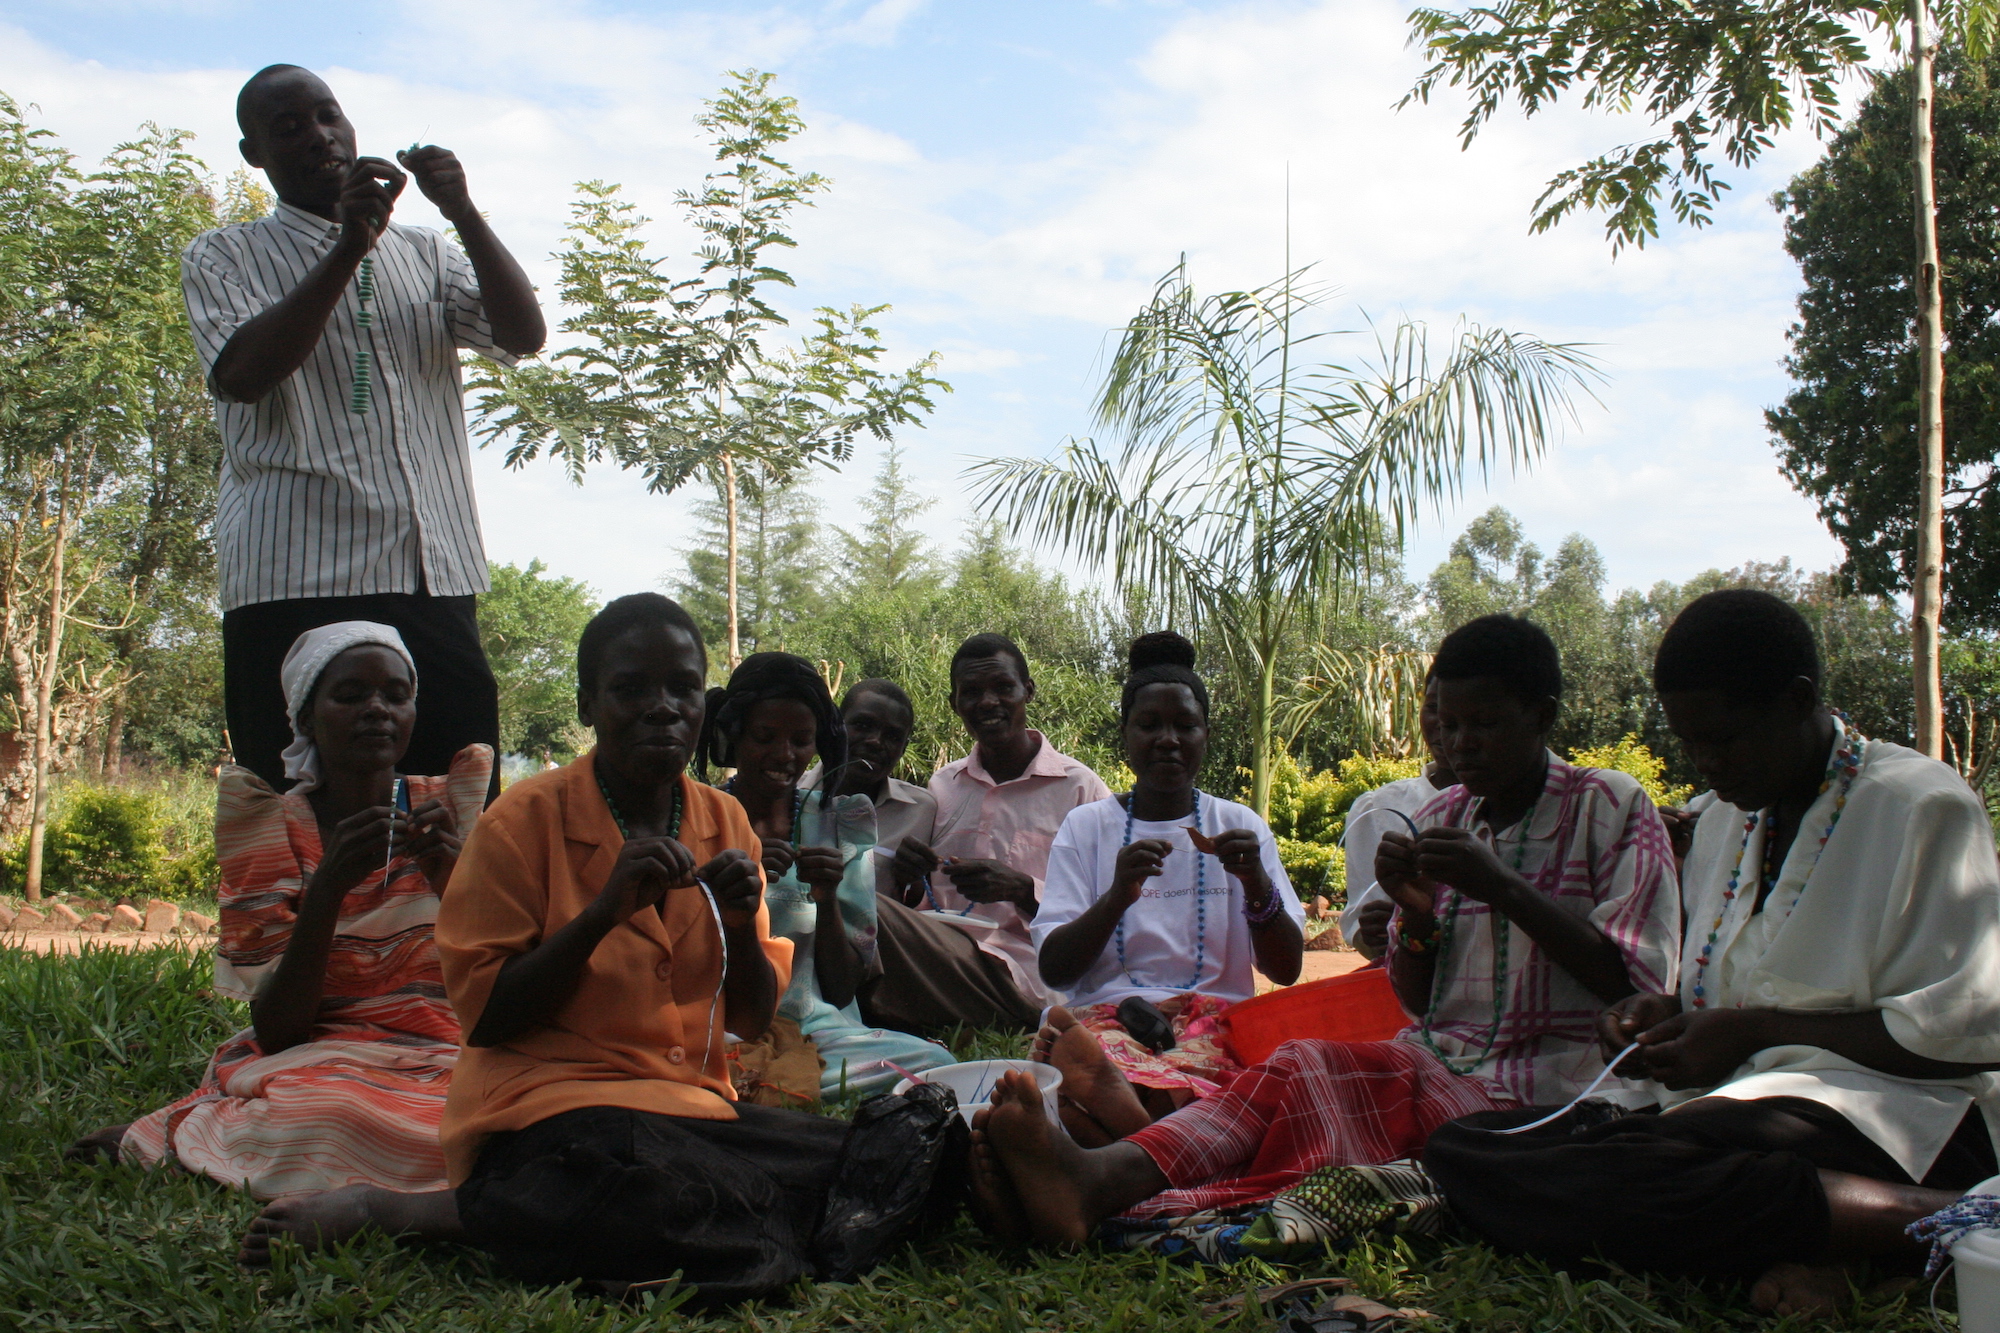 Group of people sitting in the grass making beads